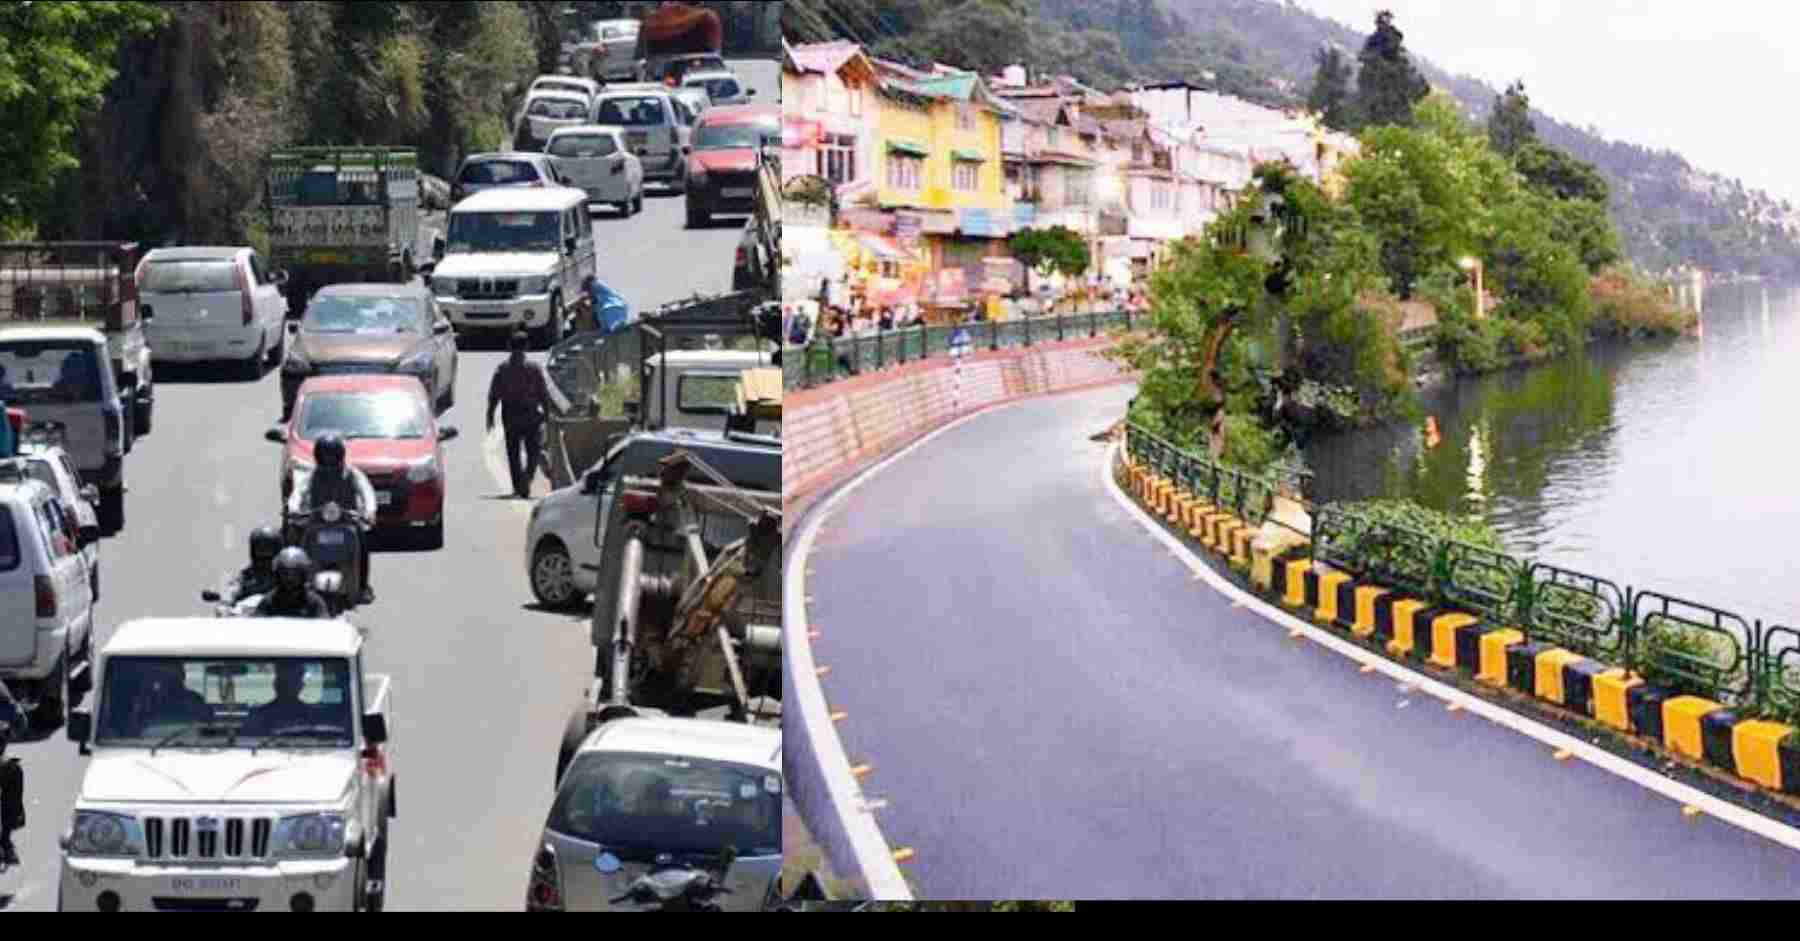 Uttarakhand news: Nainital Entry Tax increases by local government and for pass making